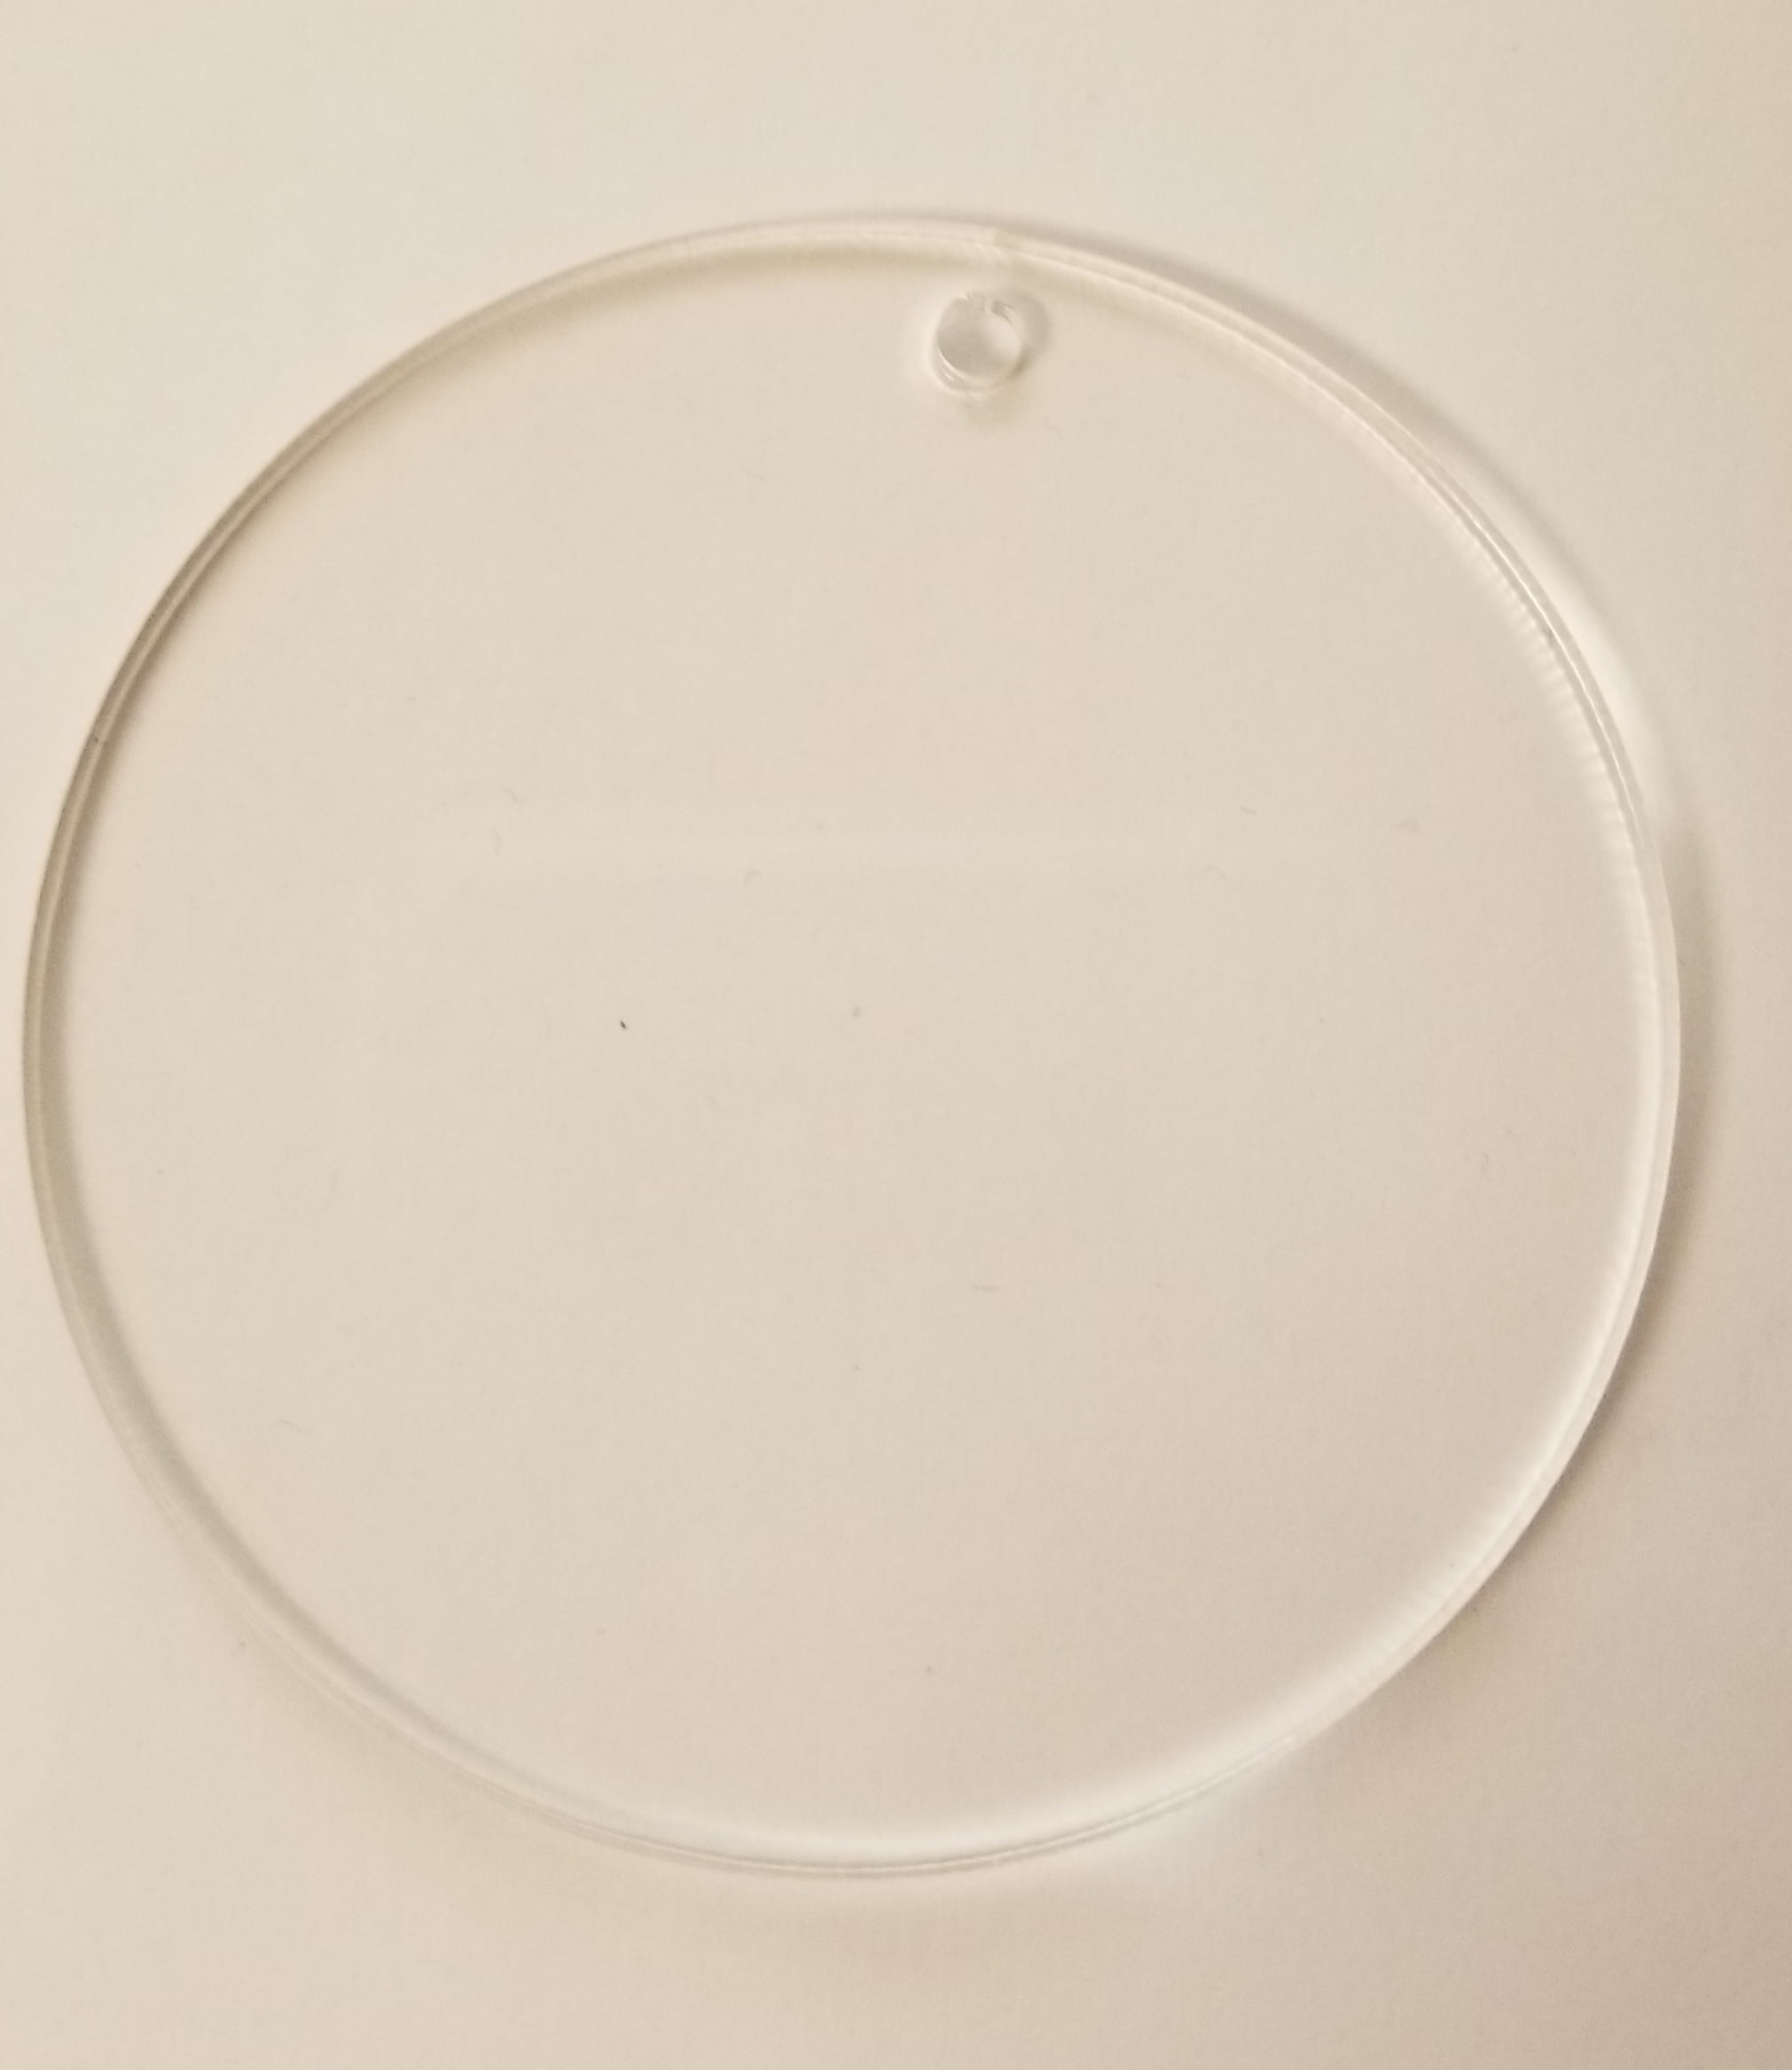 Details about   20pcs Acrylic Sheet Circle Round Disc,Clear,1/8 x 3/4inch 